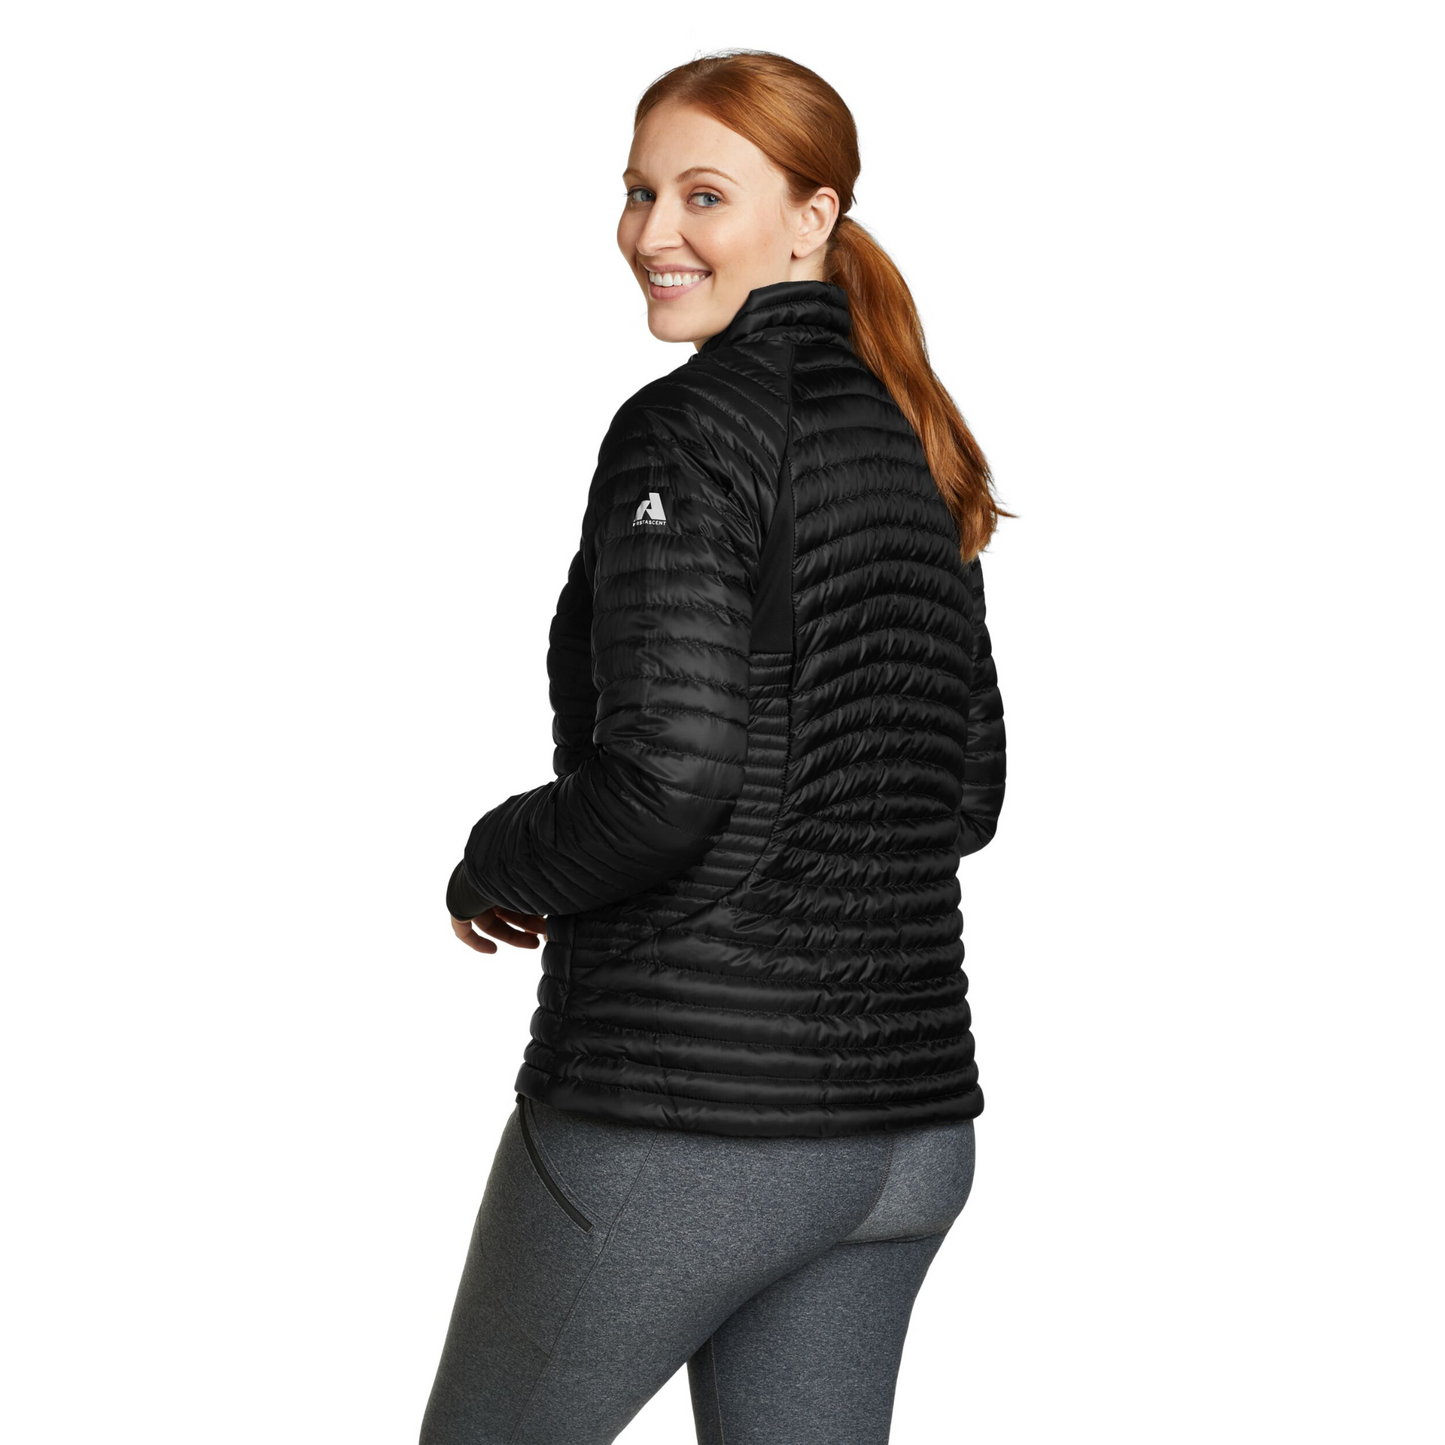 Chaqueta Mujer Microtherm 2.0 Eddie Bauer Negra | Outdoor Adventure Colombia